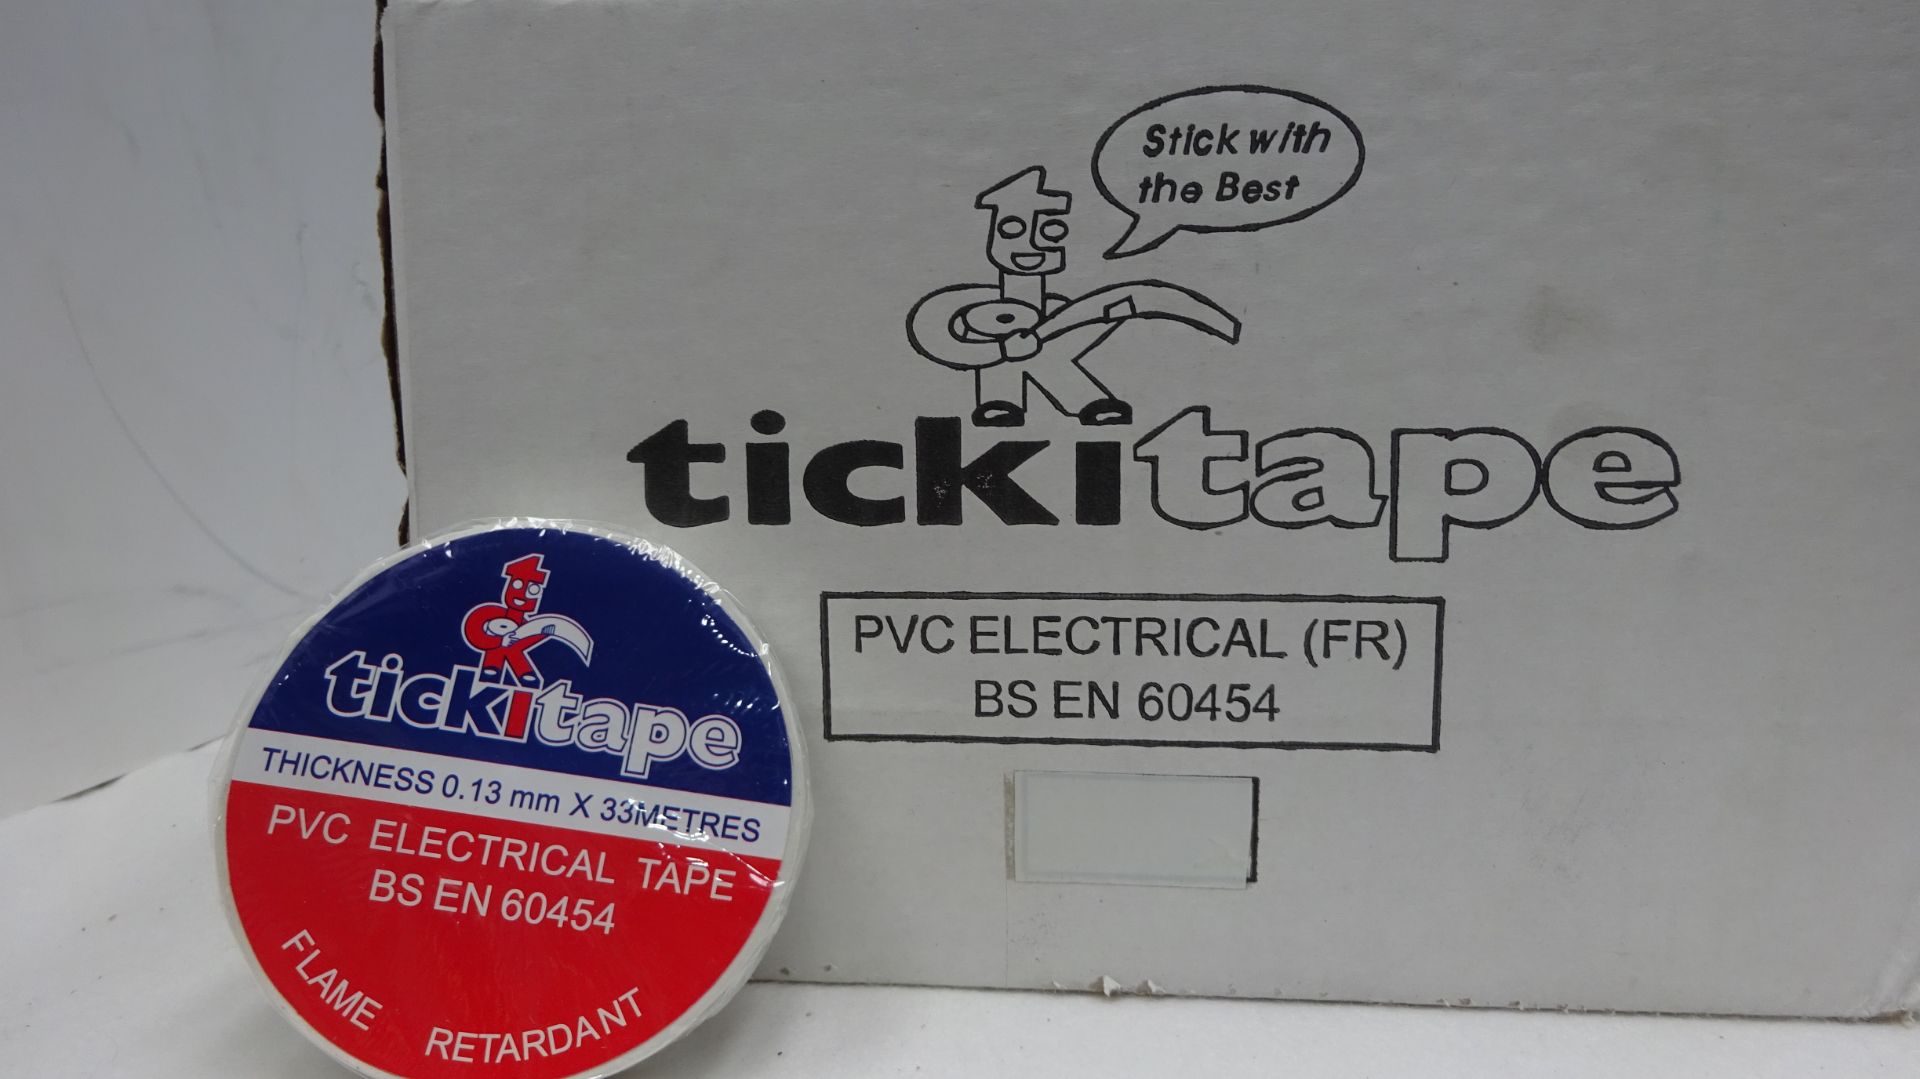 48 x TickiTape PVC Electrical Tape AT007 19mm x 33m per roll